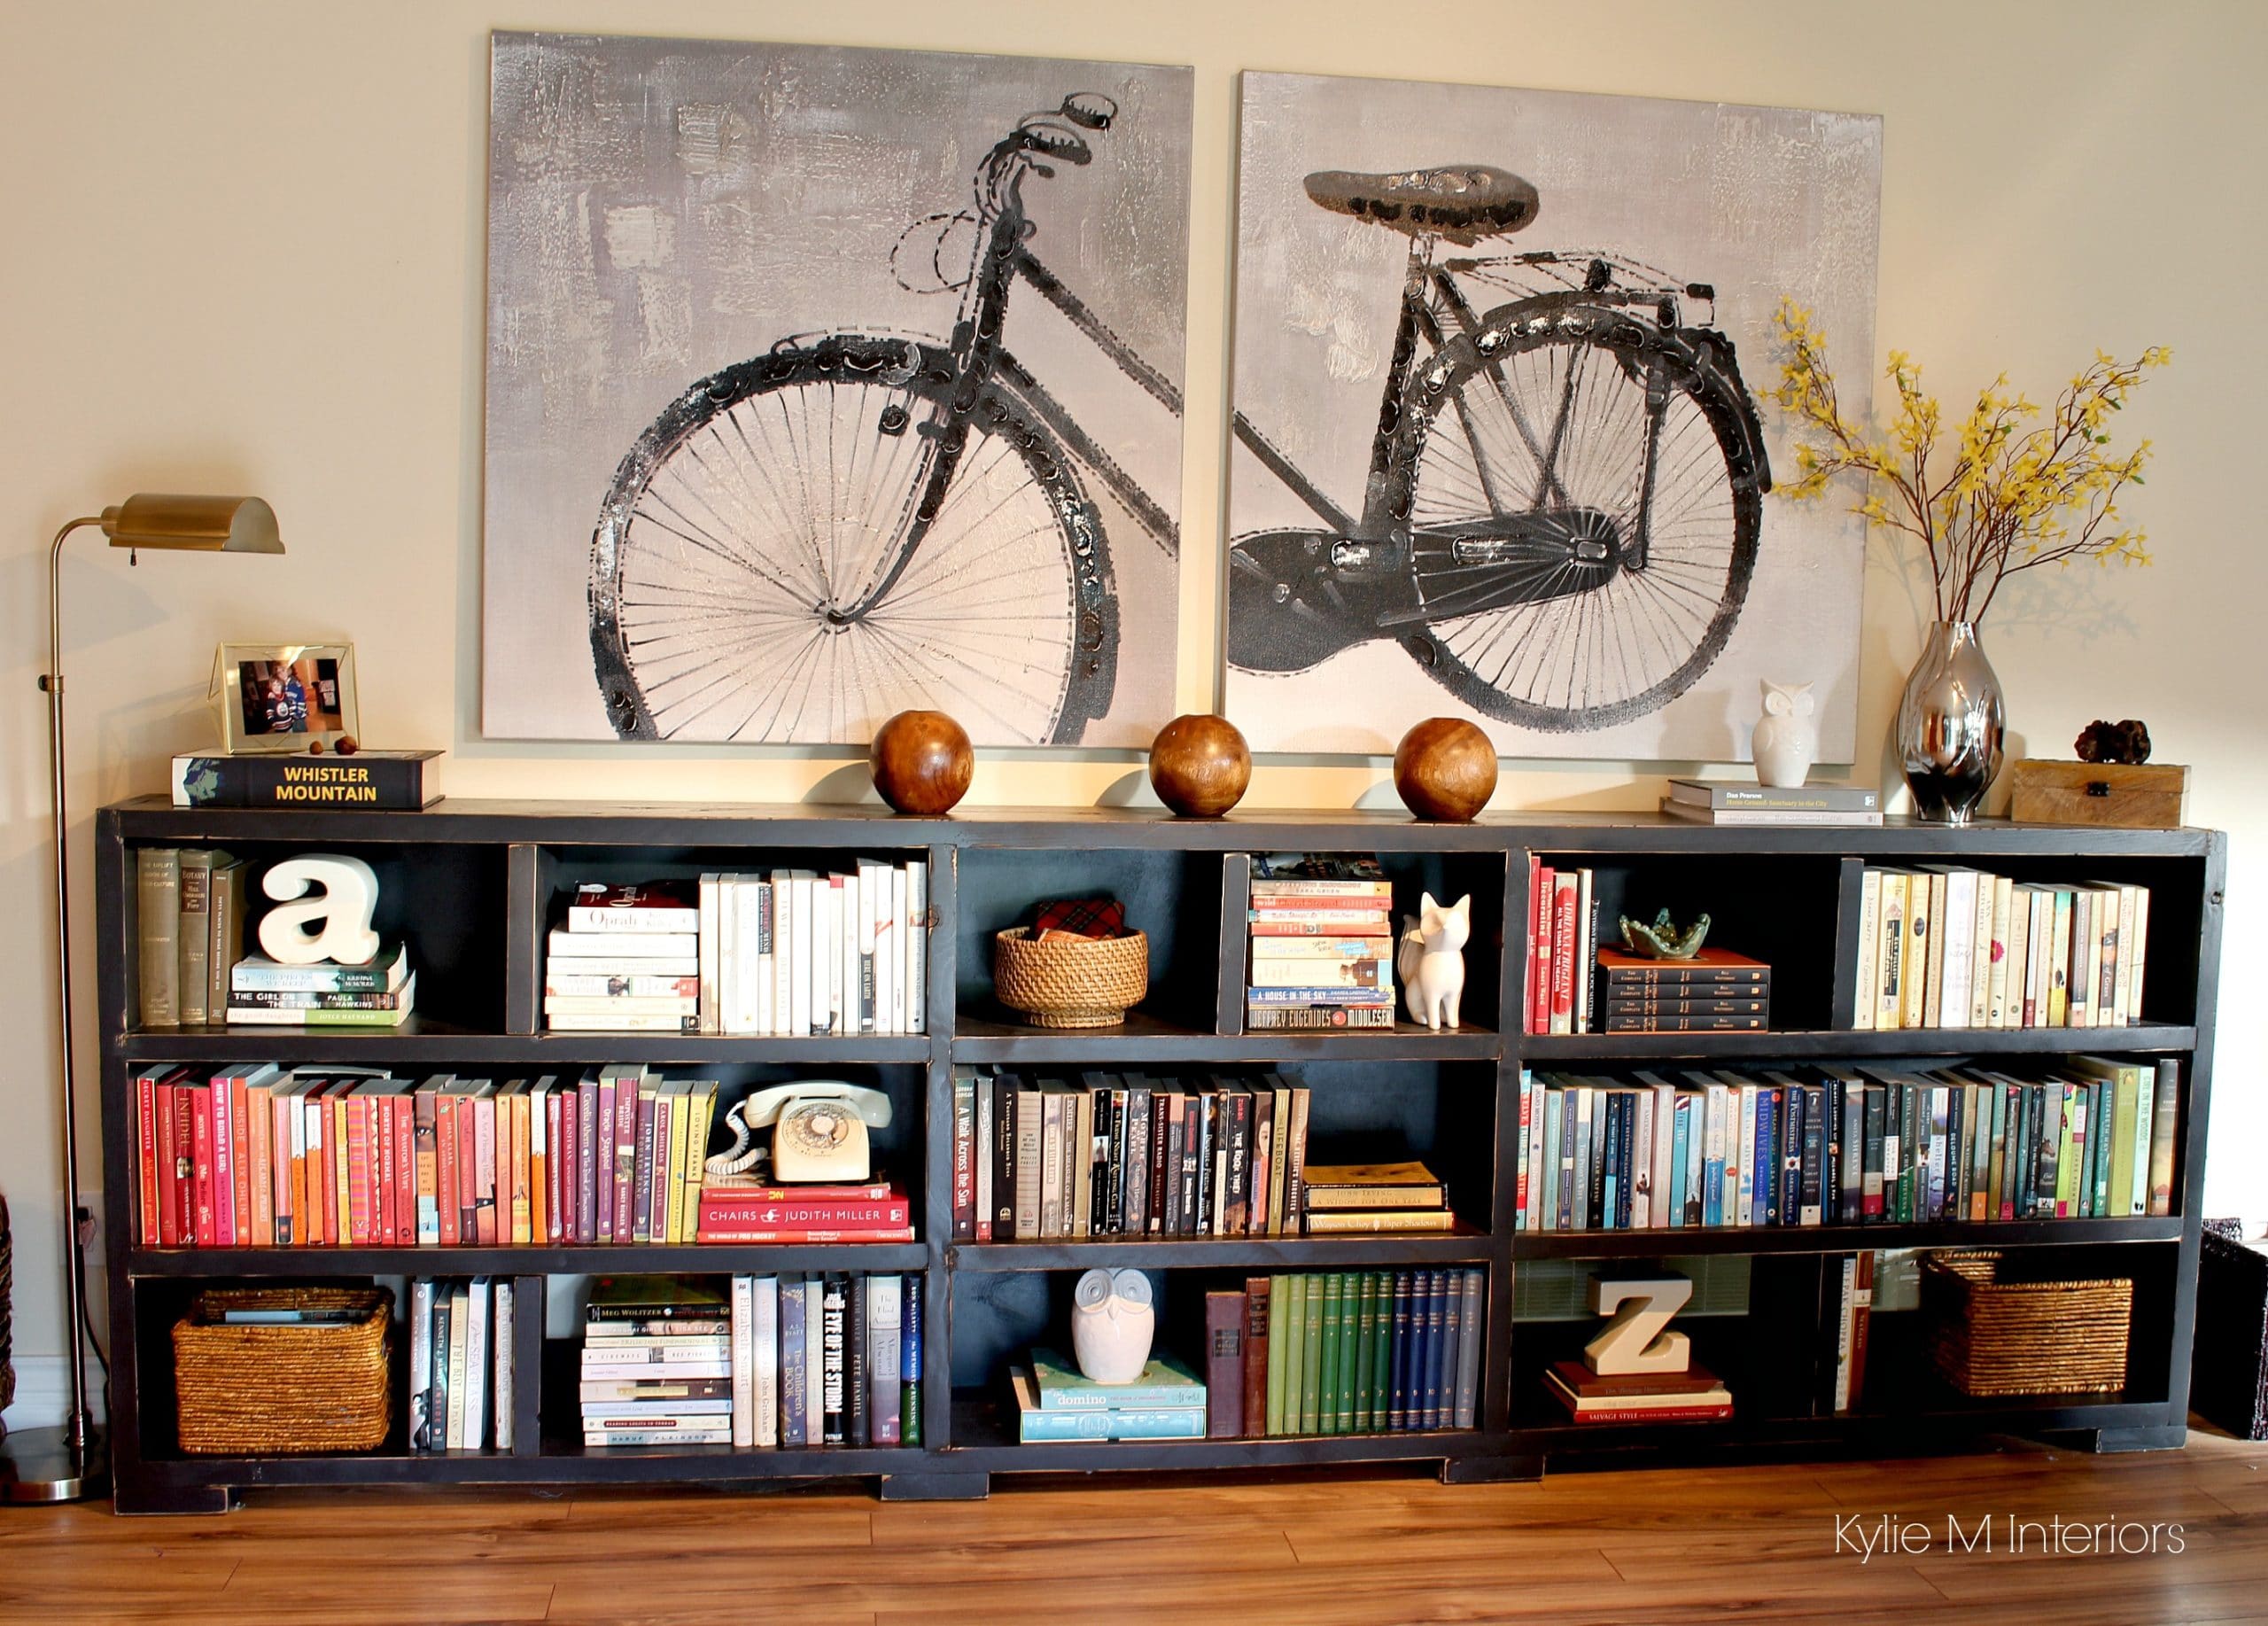 Ideas to personalize a home with home decor and books on a long, low